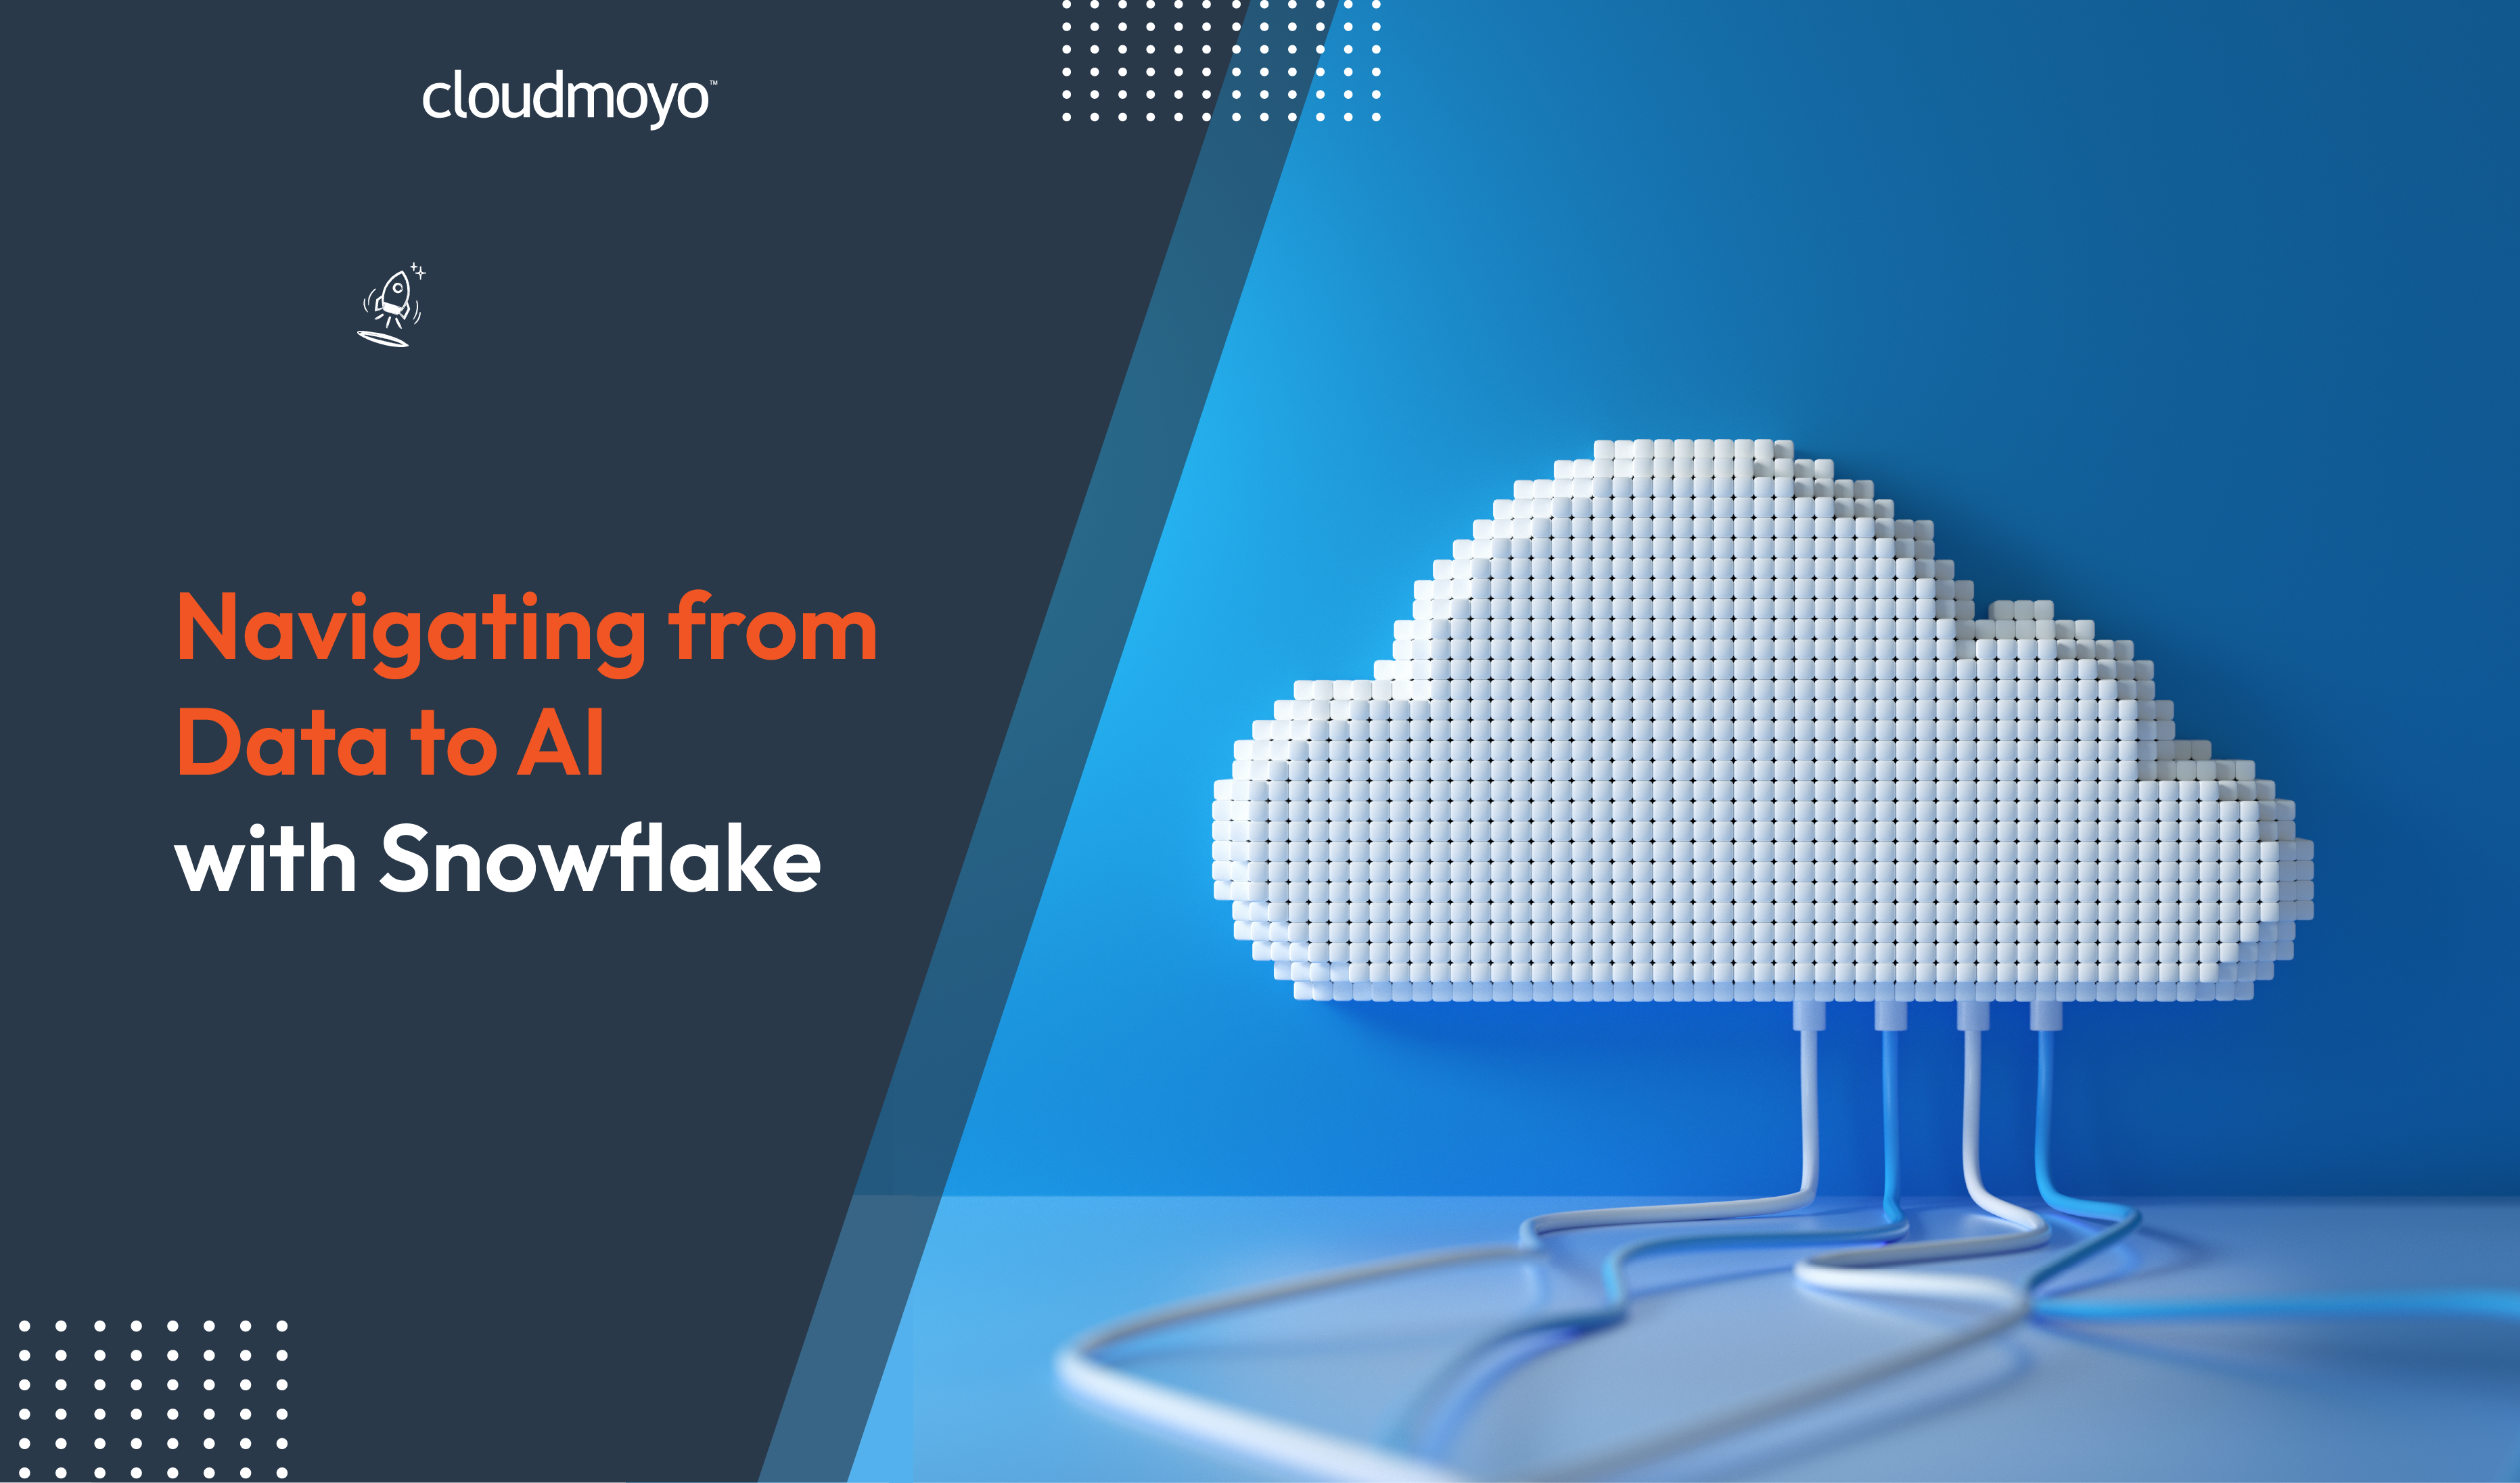 <a href="https://www.cloudmoyo.com/industry-perspectives/download-navigating-from-data-to-ai-with-snowflake/?utm_source=website_content&utm_medium=organic_IP&utm_campaign=Generic_HomePage_Banner_4Jan2023/" class="homeBannerLink"> Navigating from Data to AI with Snowflake</a>